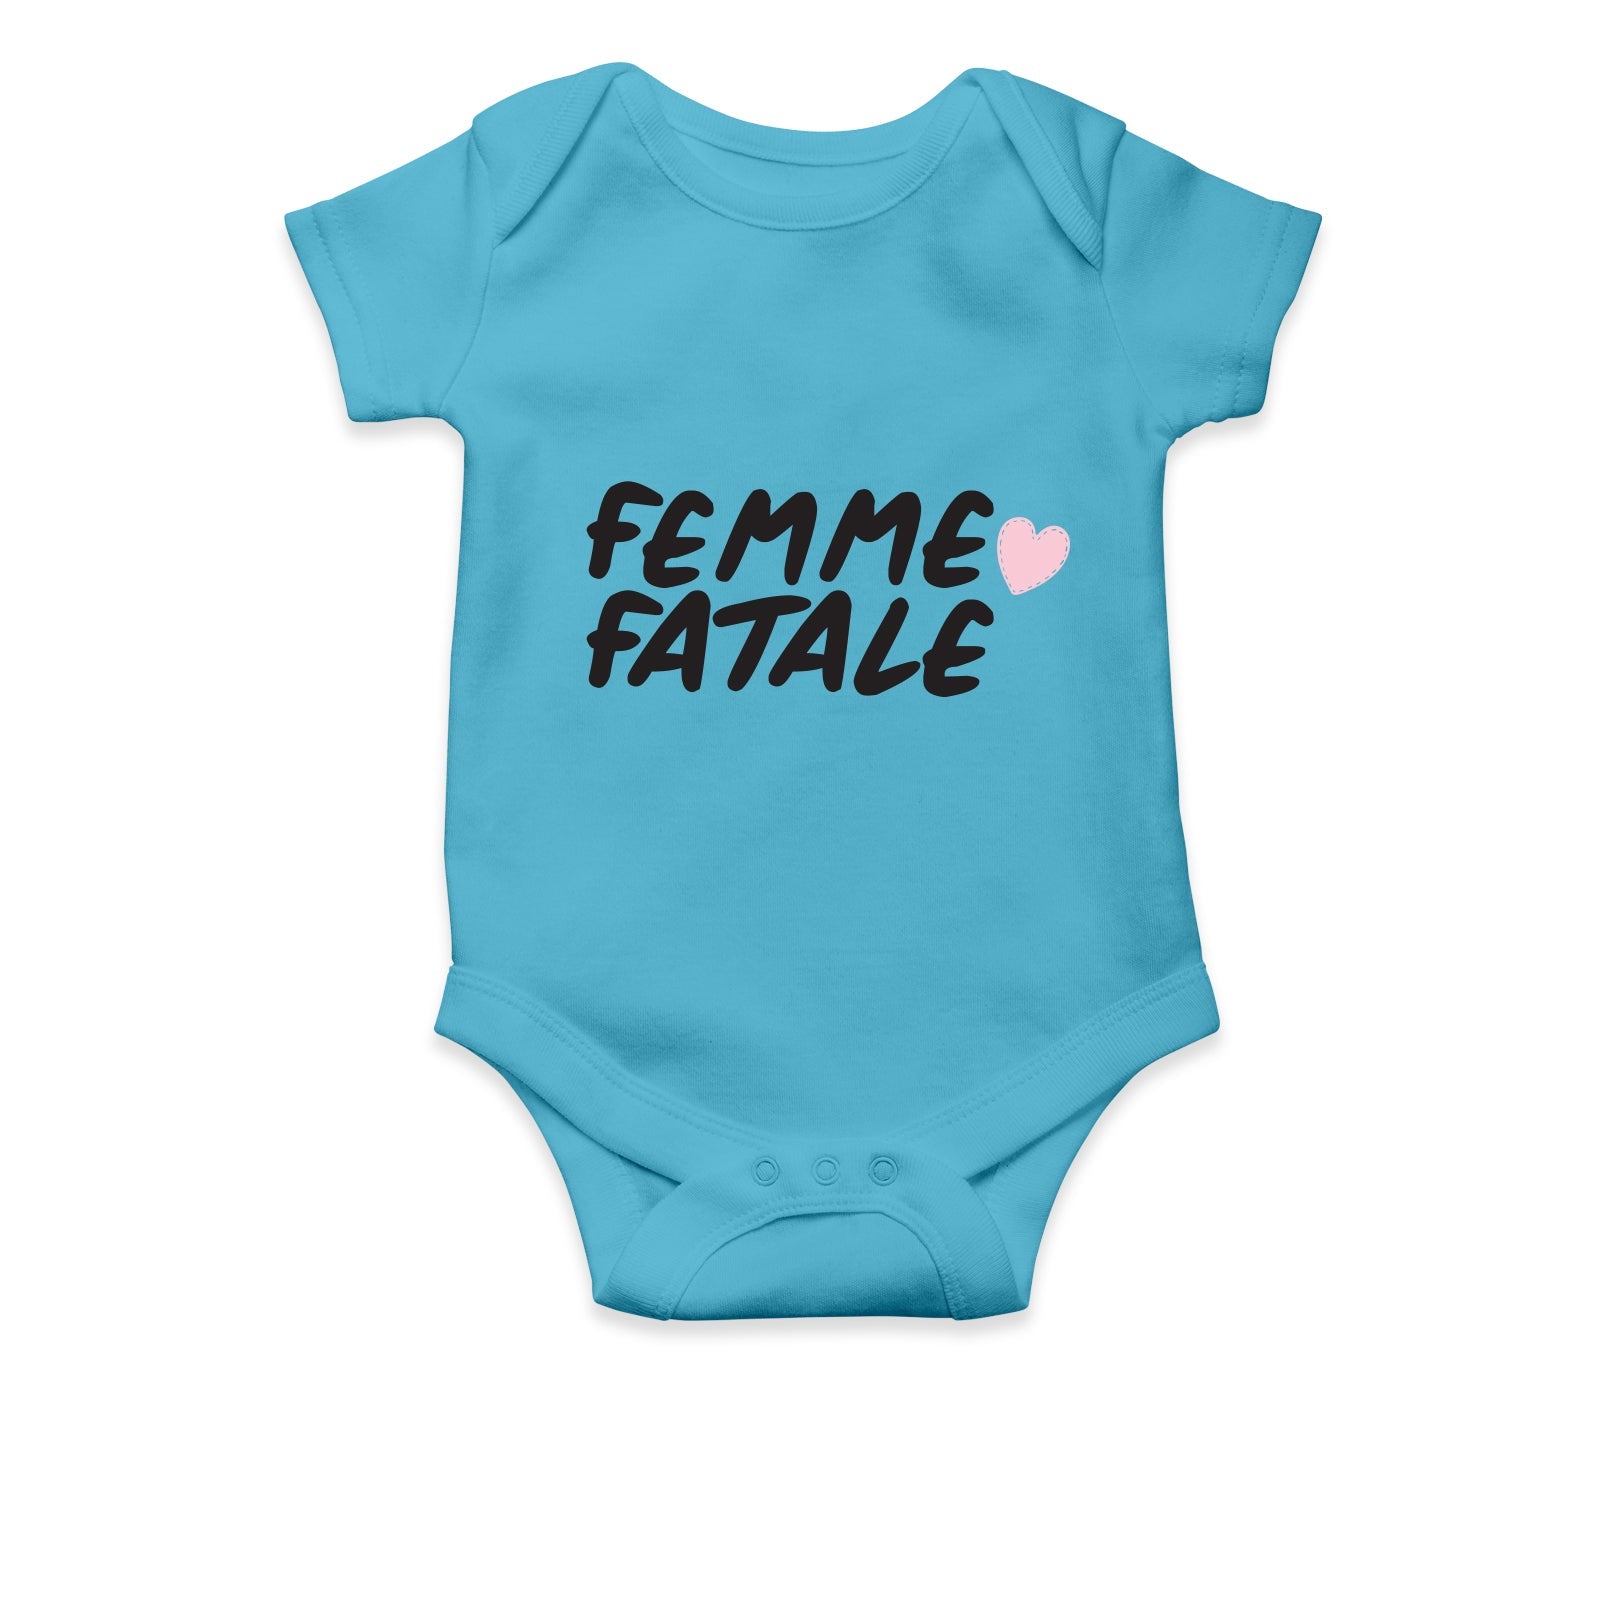 Personalised White Baby Body Suit Grow Vest - Le Femme